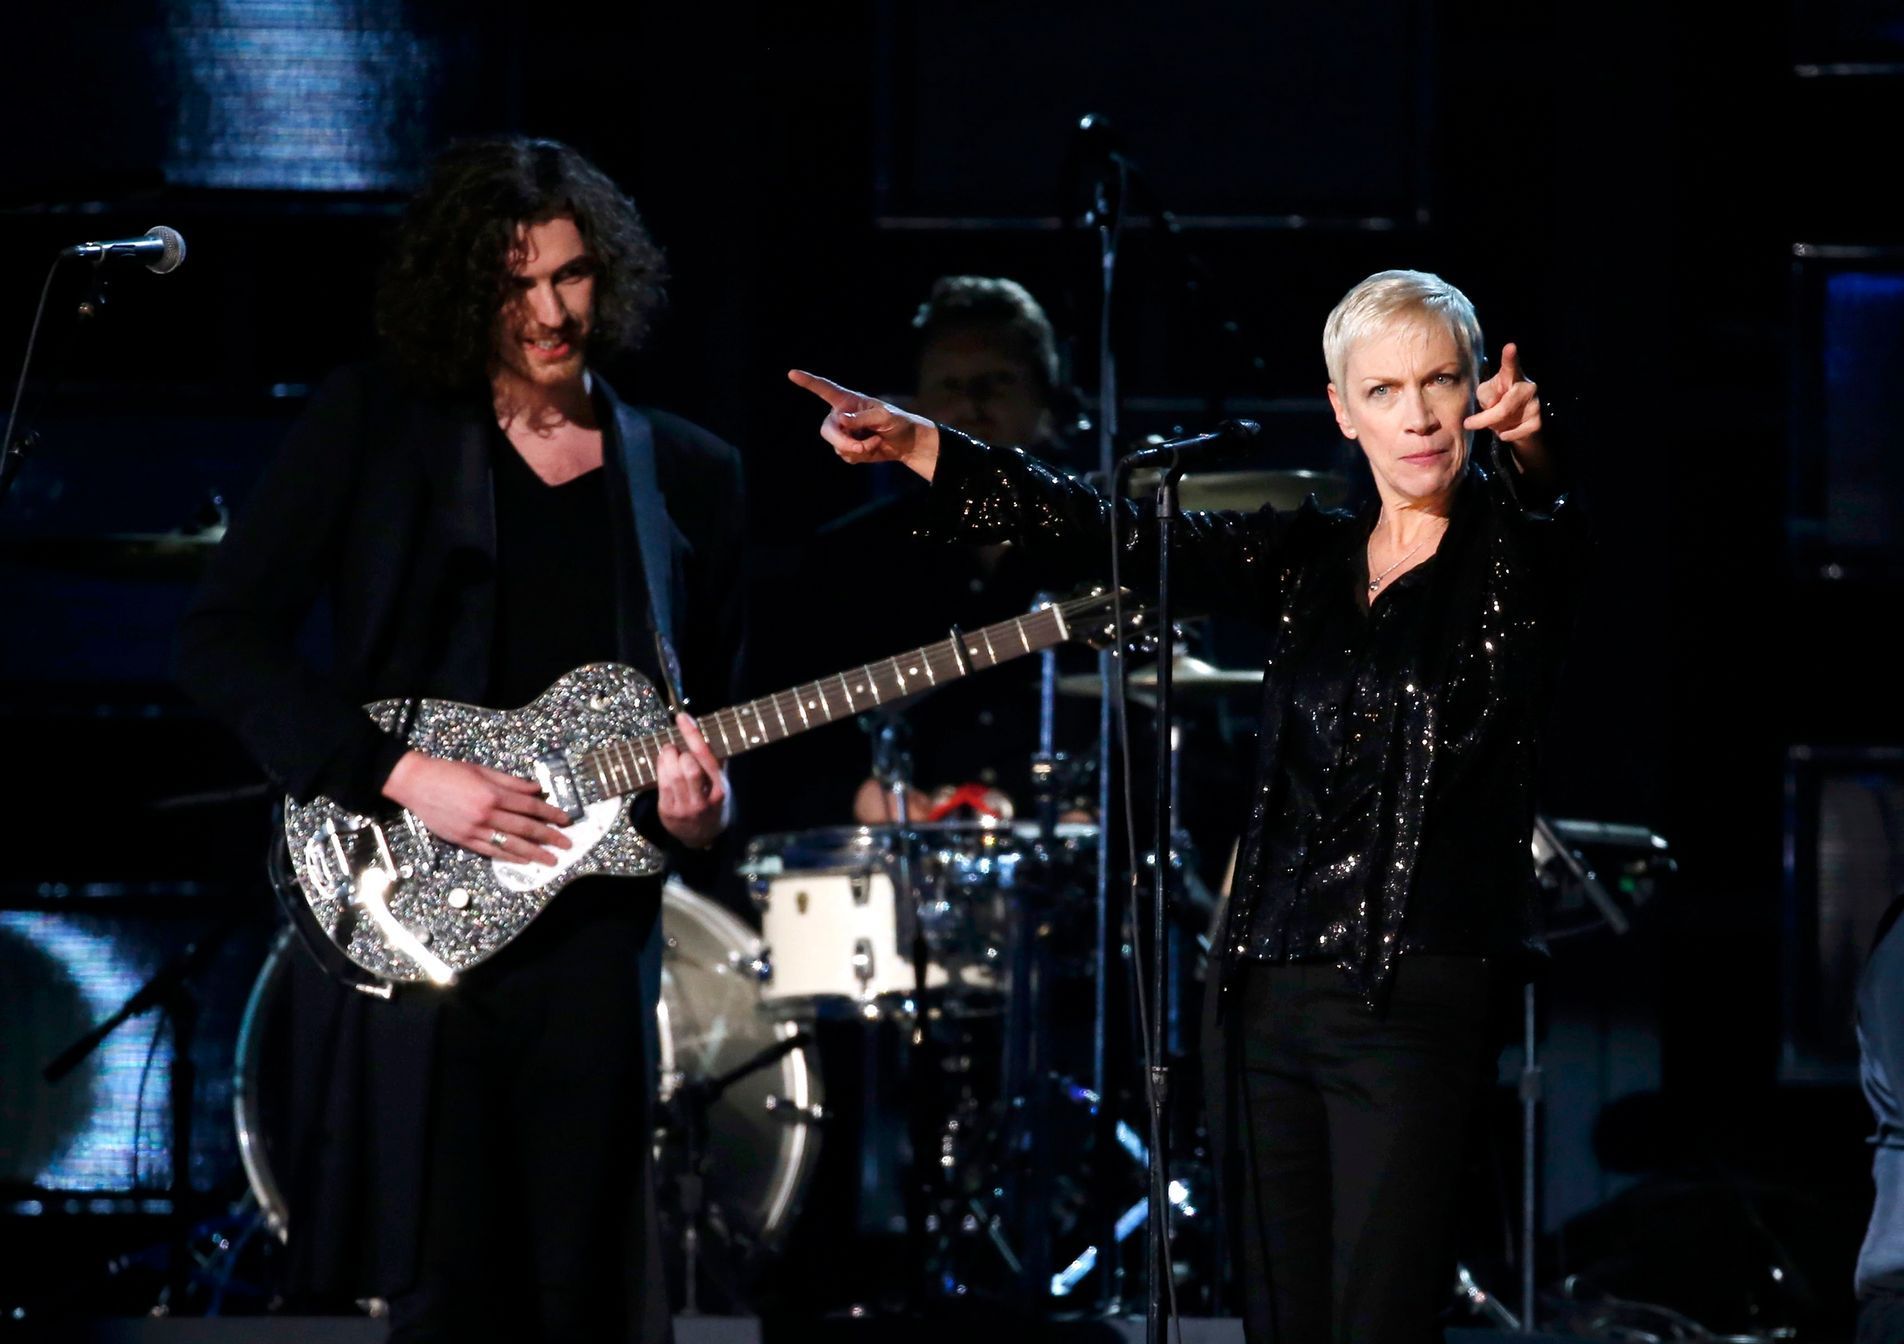 Annie Lennox performs &quot;I Put a Spell On You&quot; with Hozier at the 57th annual Grammy Awards in Los Angeles